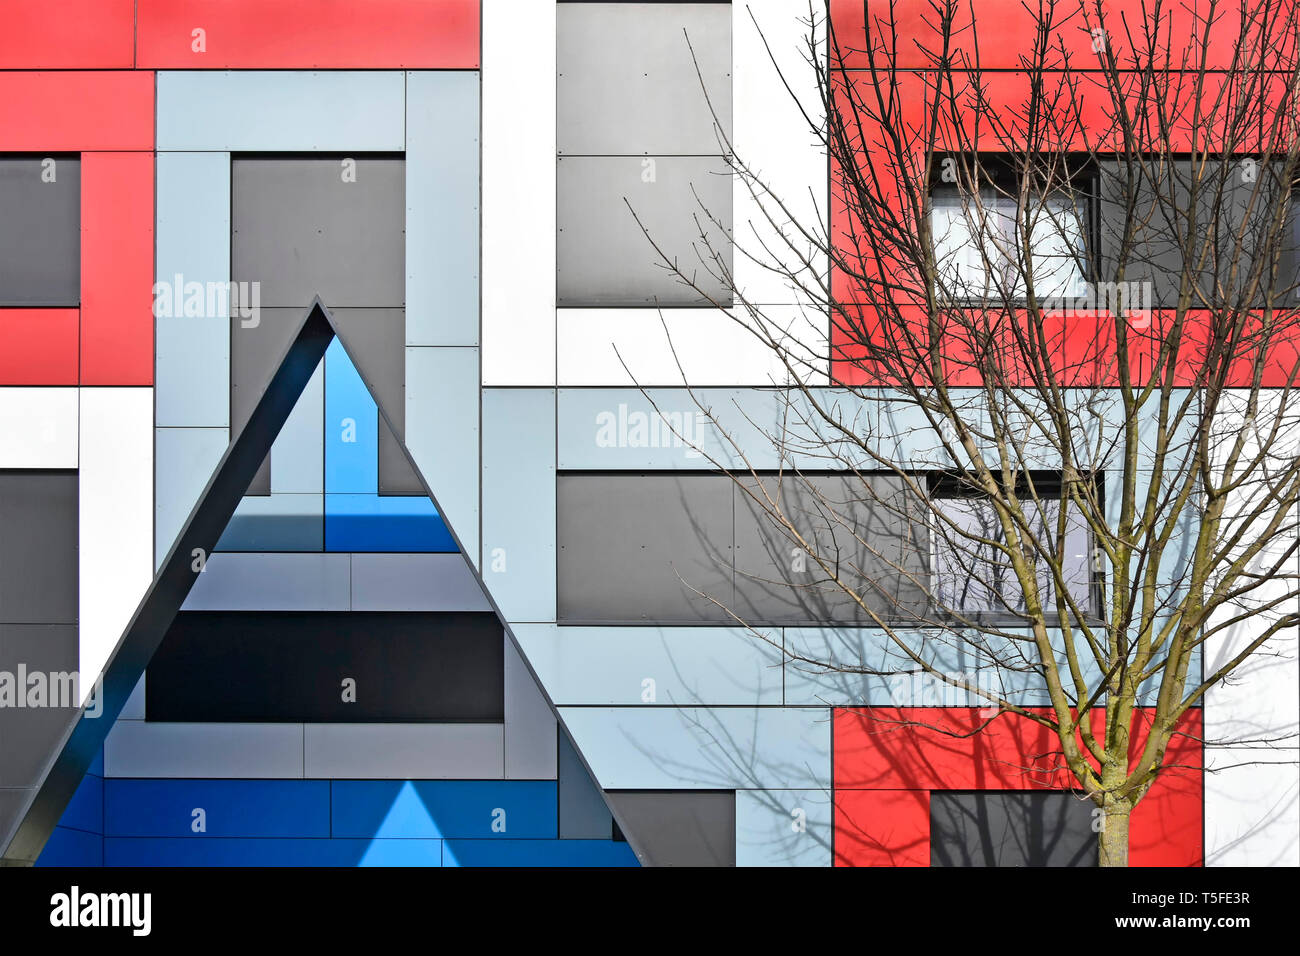 Tree & colourful abstract geometric  architectural shapes with triangle on cladding facade of modern student accommodation building in Southend UK Stock Photo